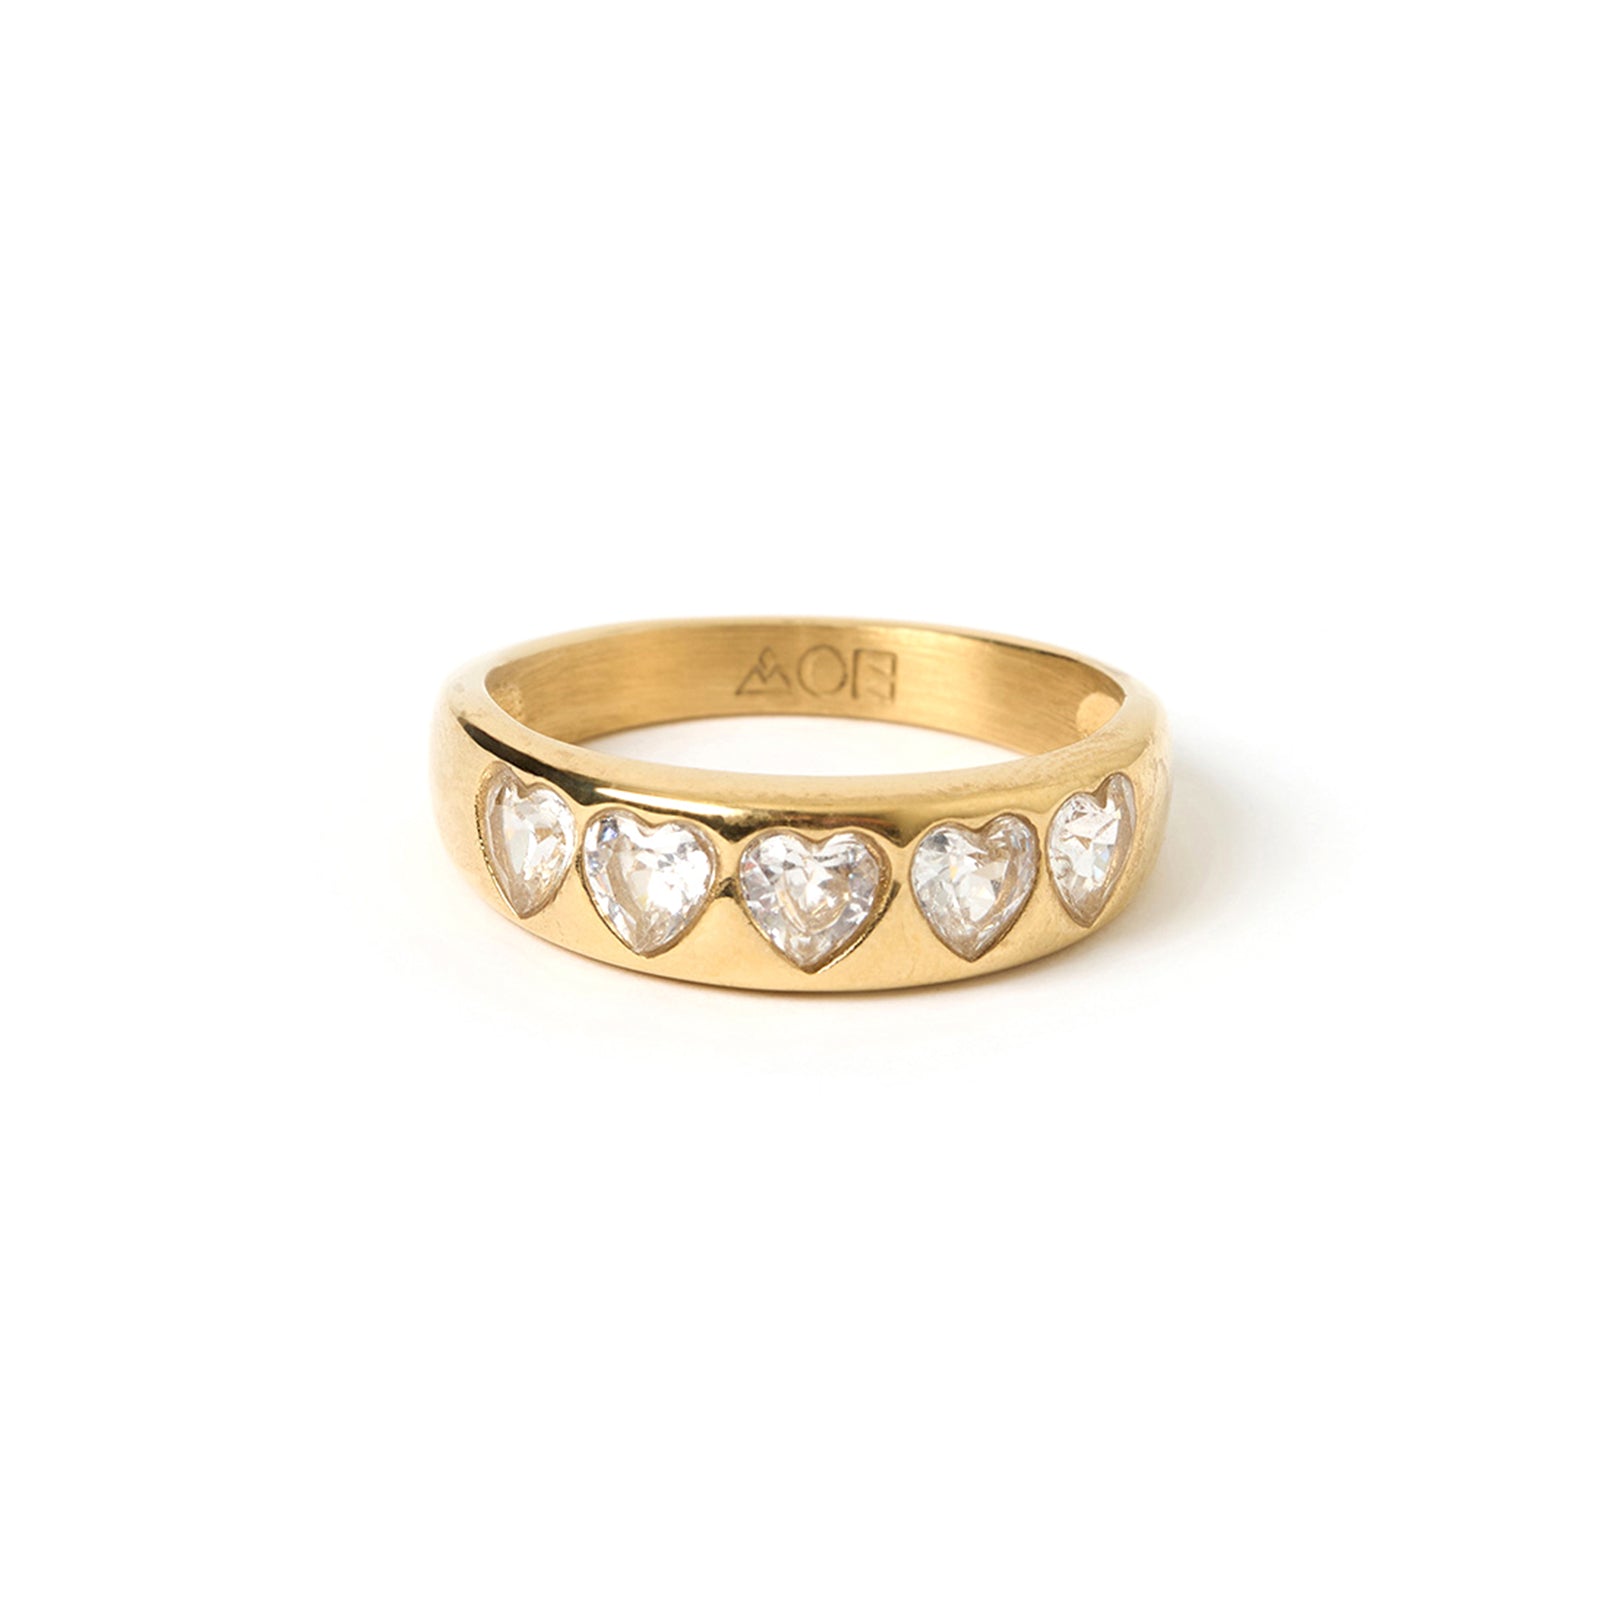 J'adore Gold Ring - Stone